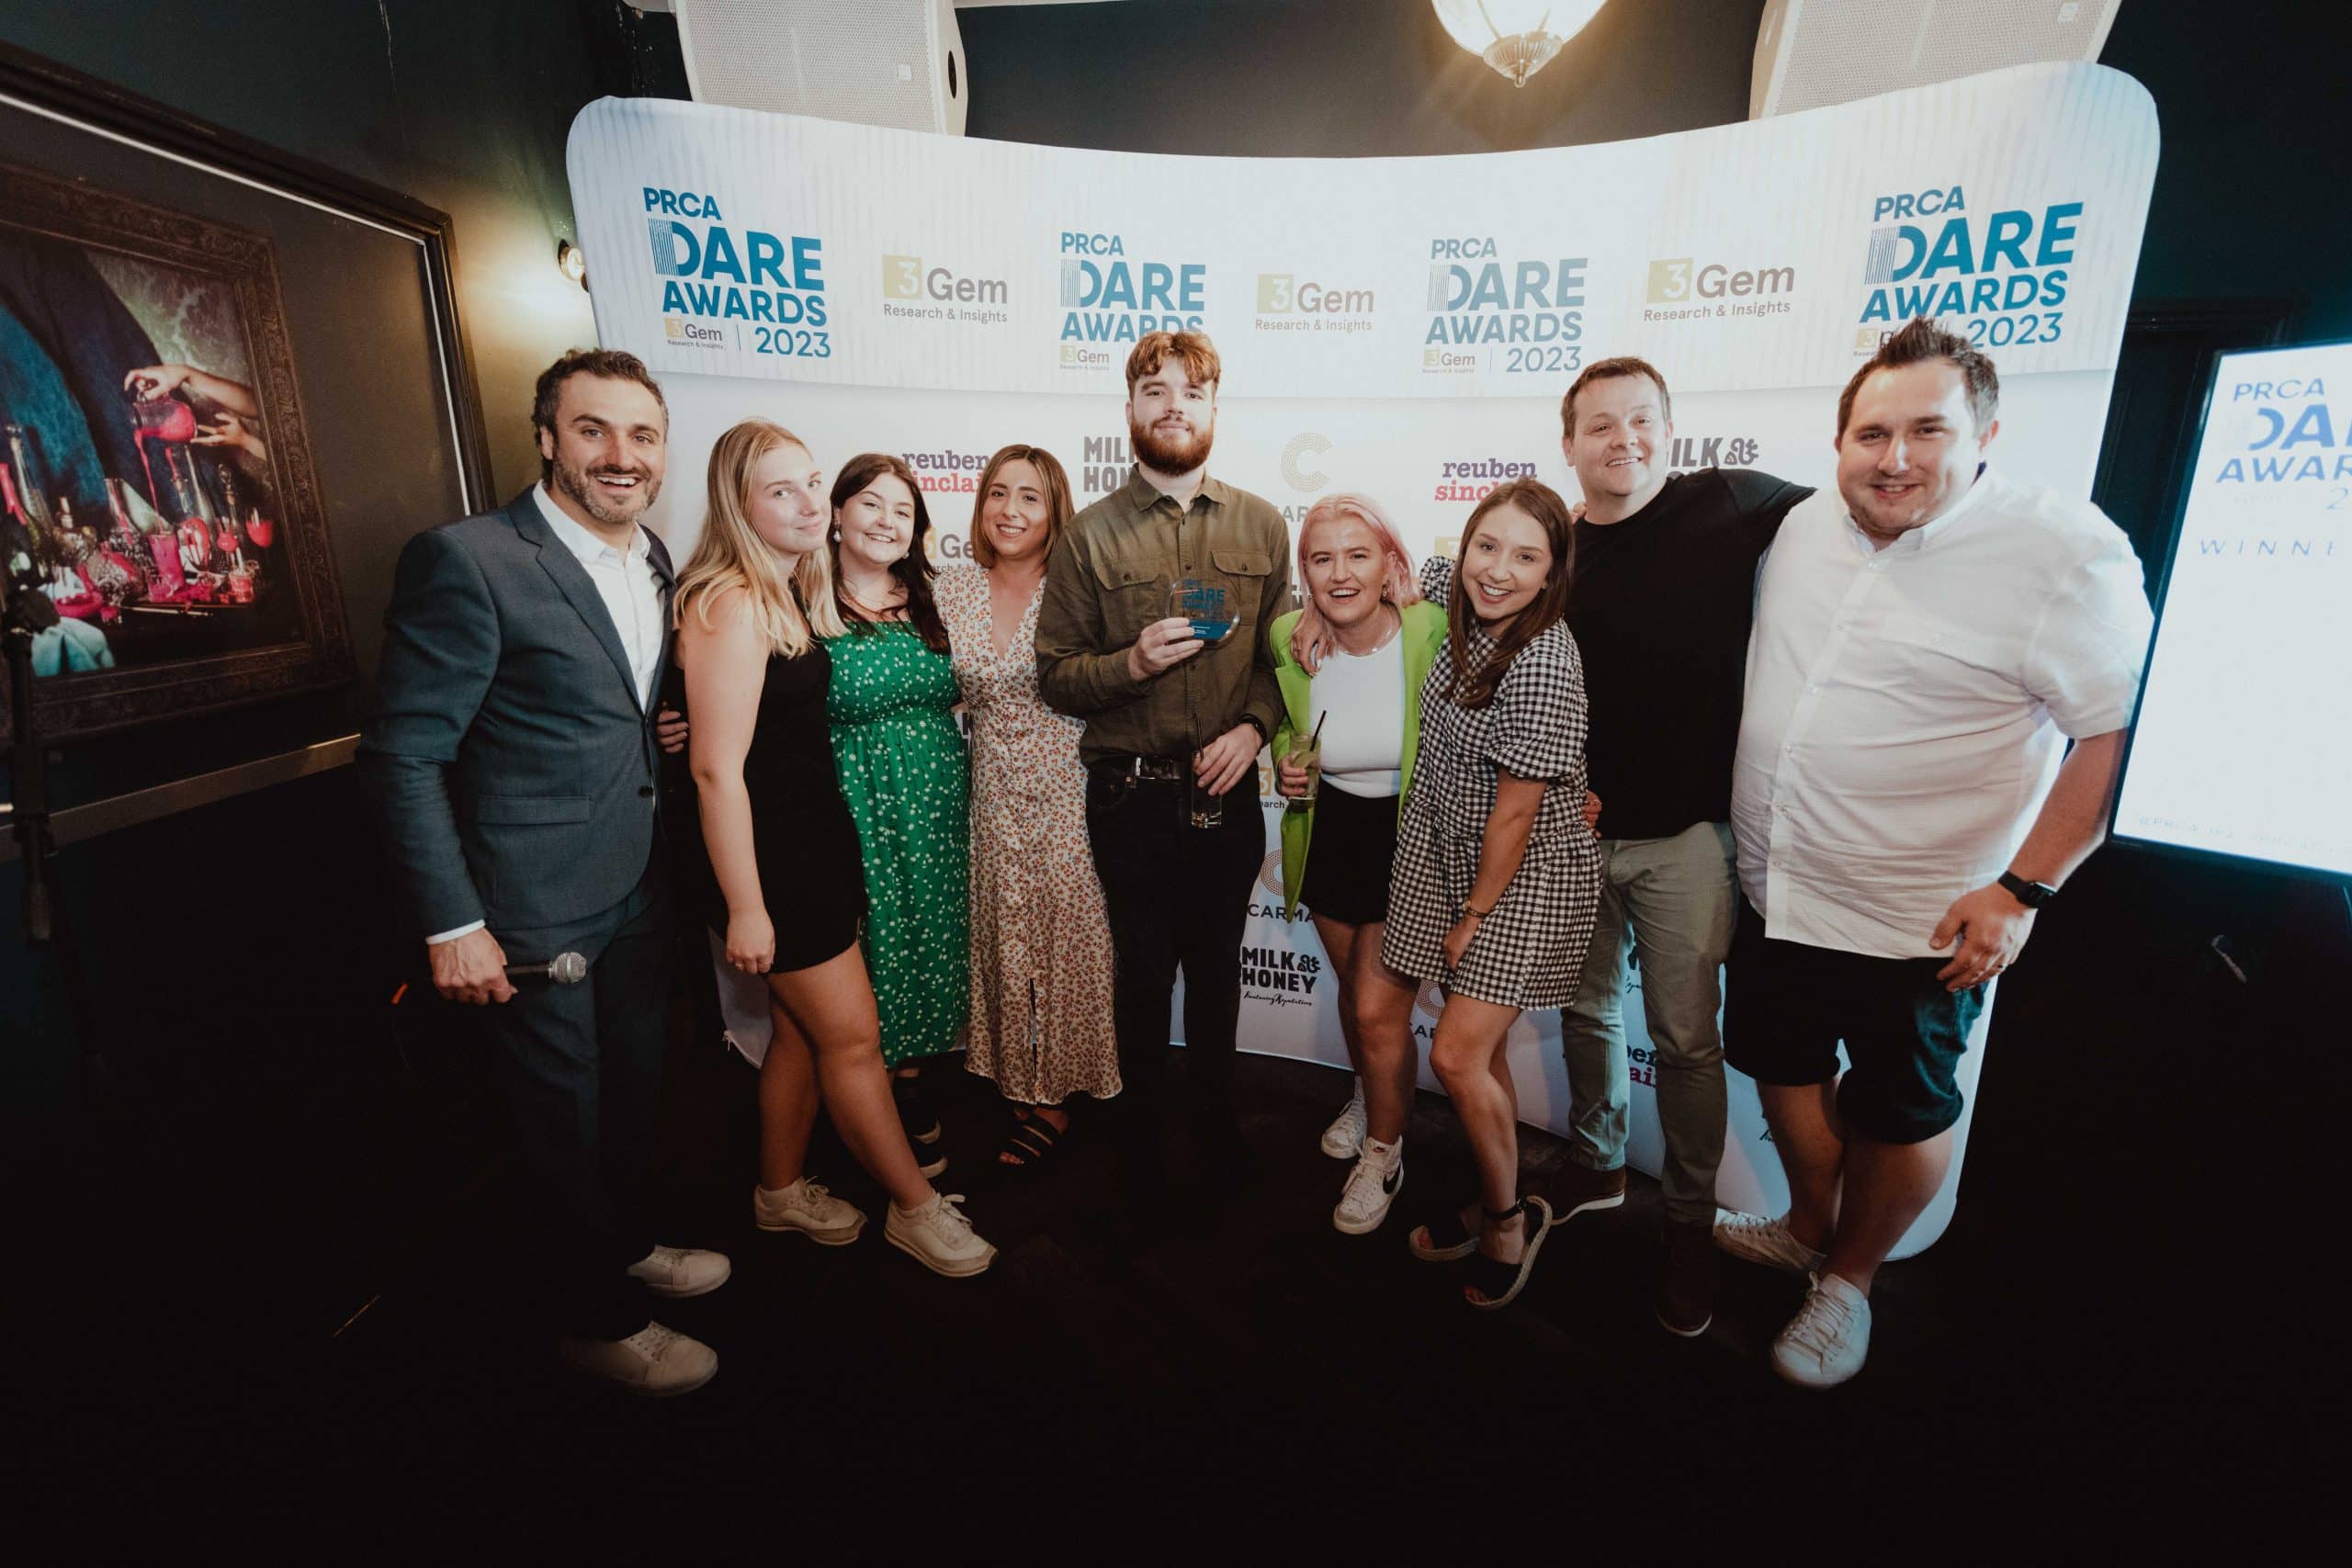 Prohibition PR wins a hat trick of awards at the PRCA DARE Awards